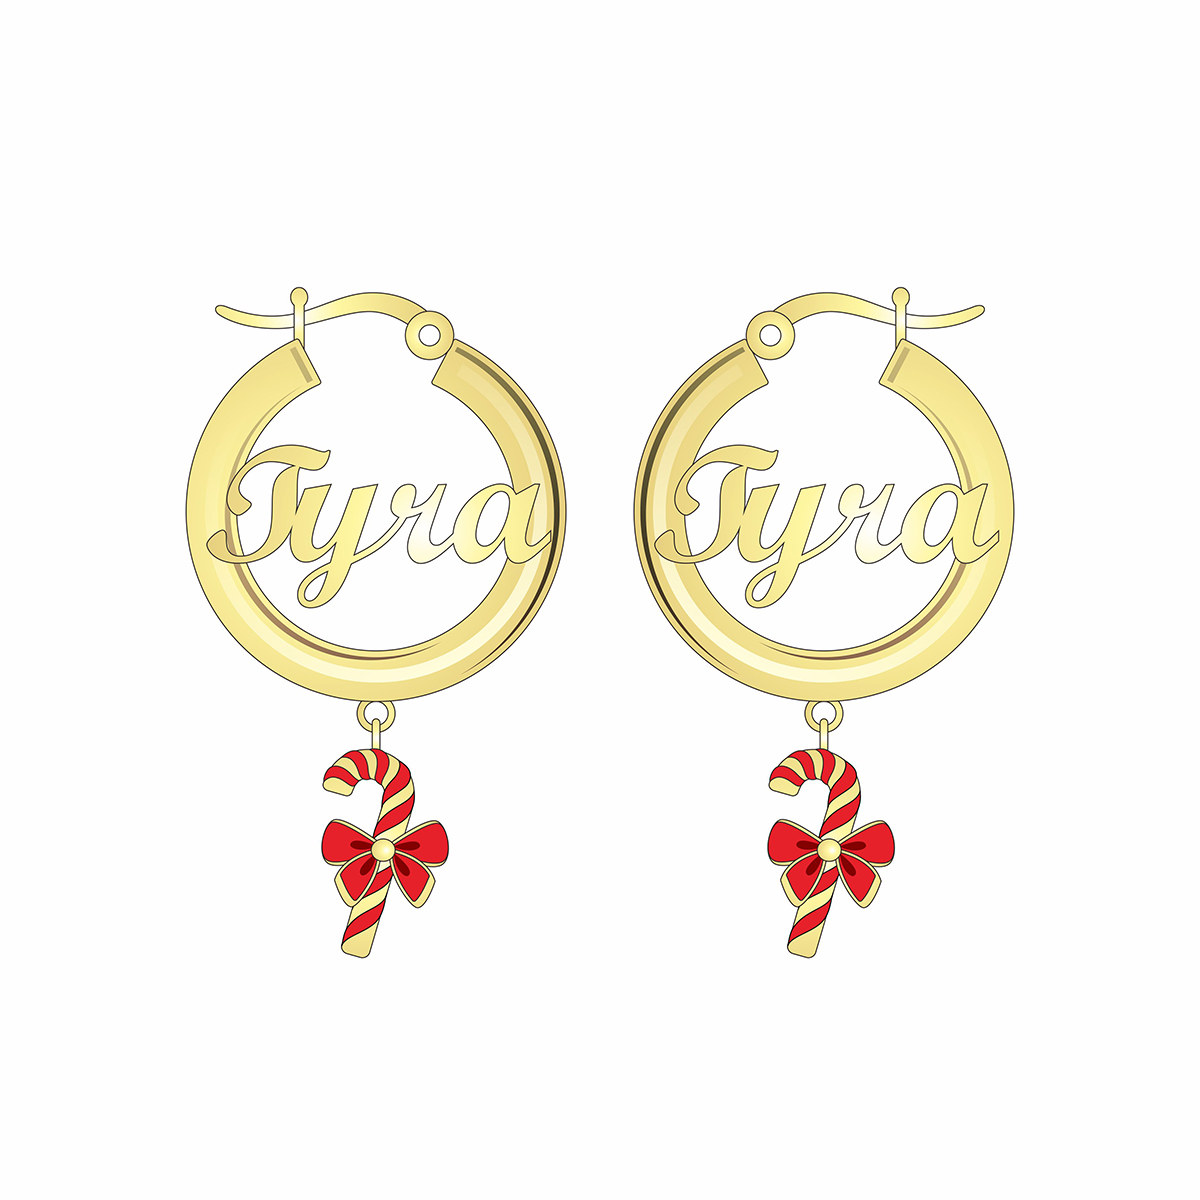 30mm Personalized Nameplate Earrings with Candy Cane